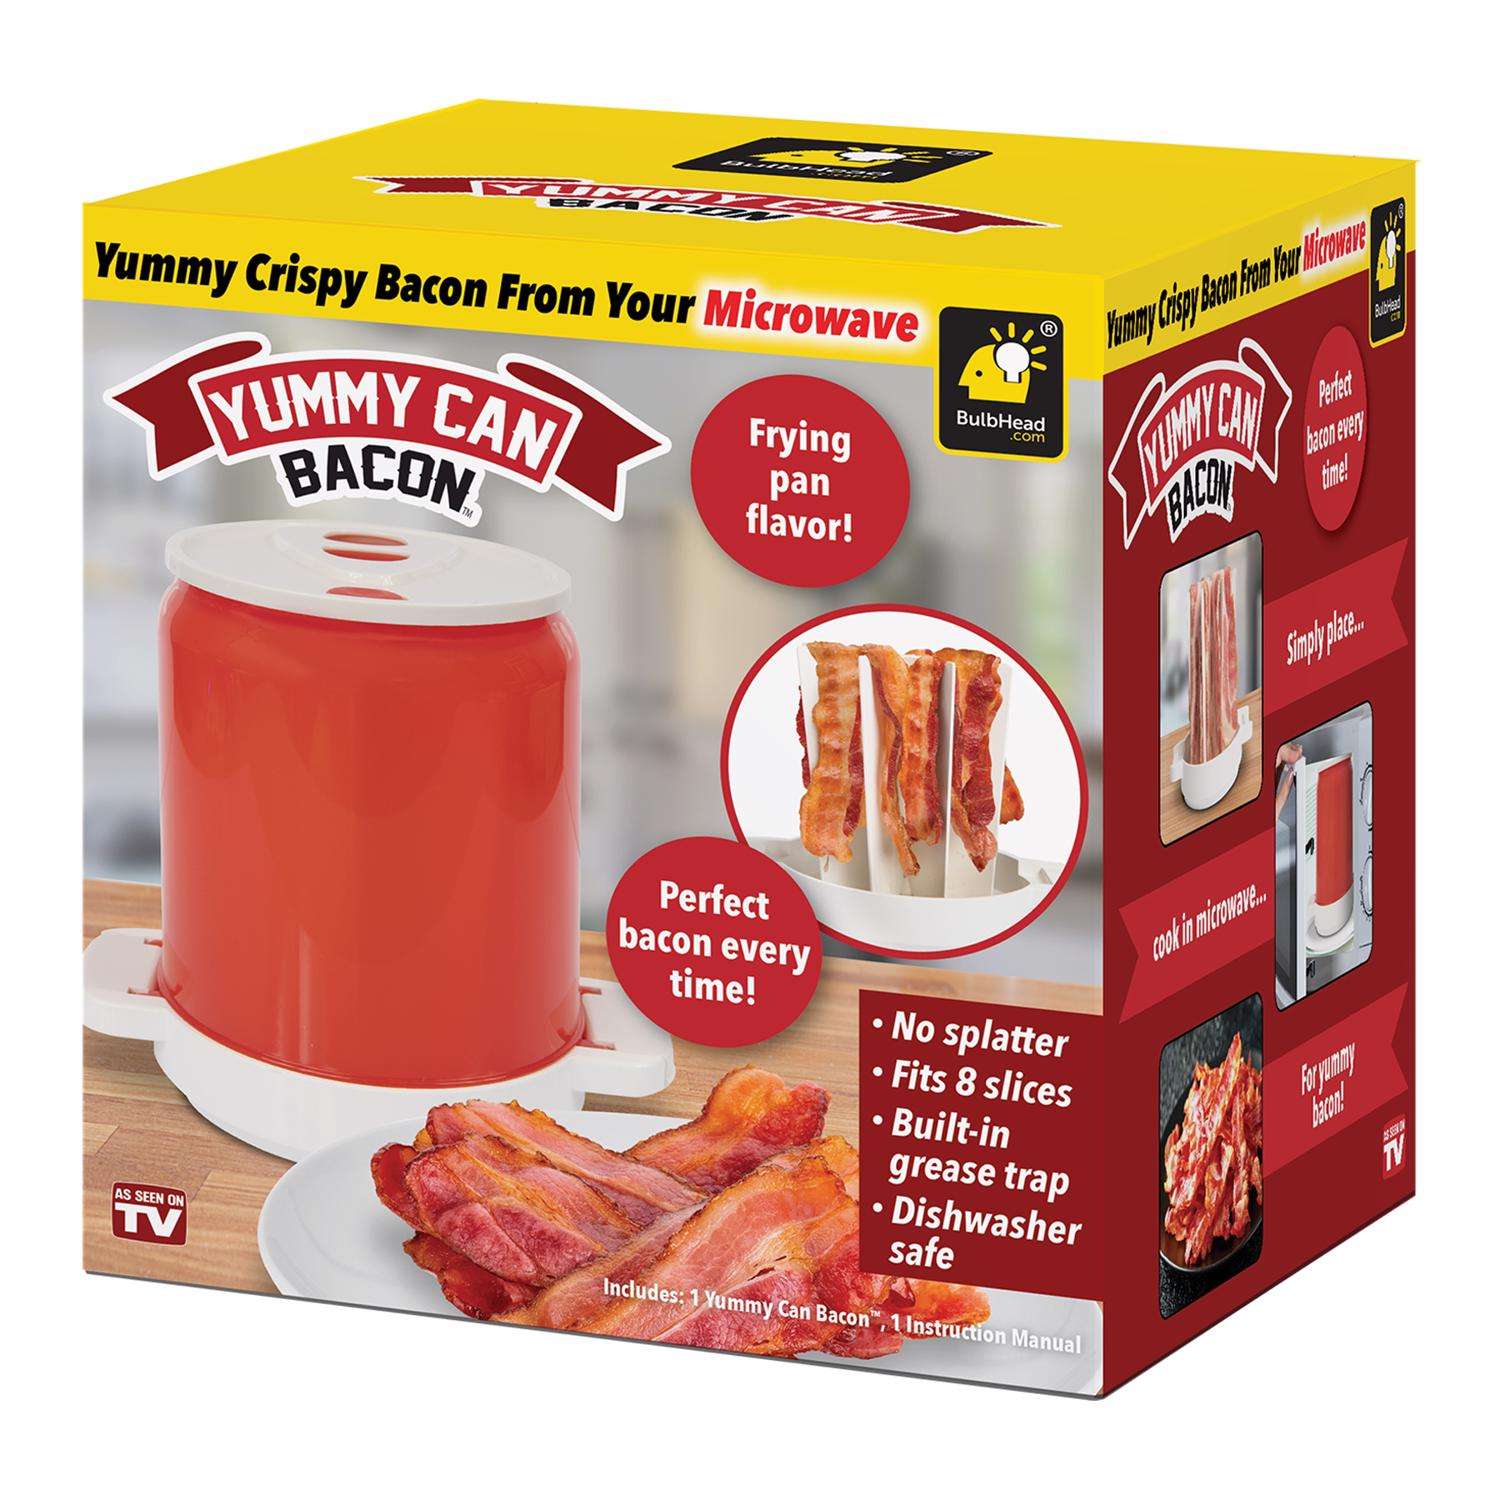 Microwave Bacon Cooker Small Mess-Free & Splatter-Prof 15915 BulbHead Yummy Can Red 